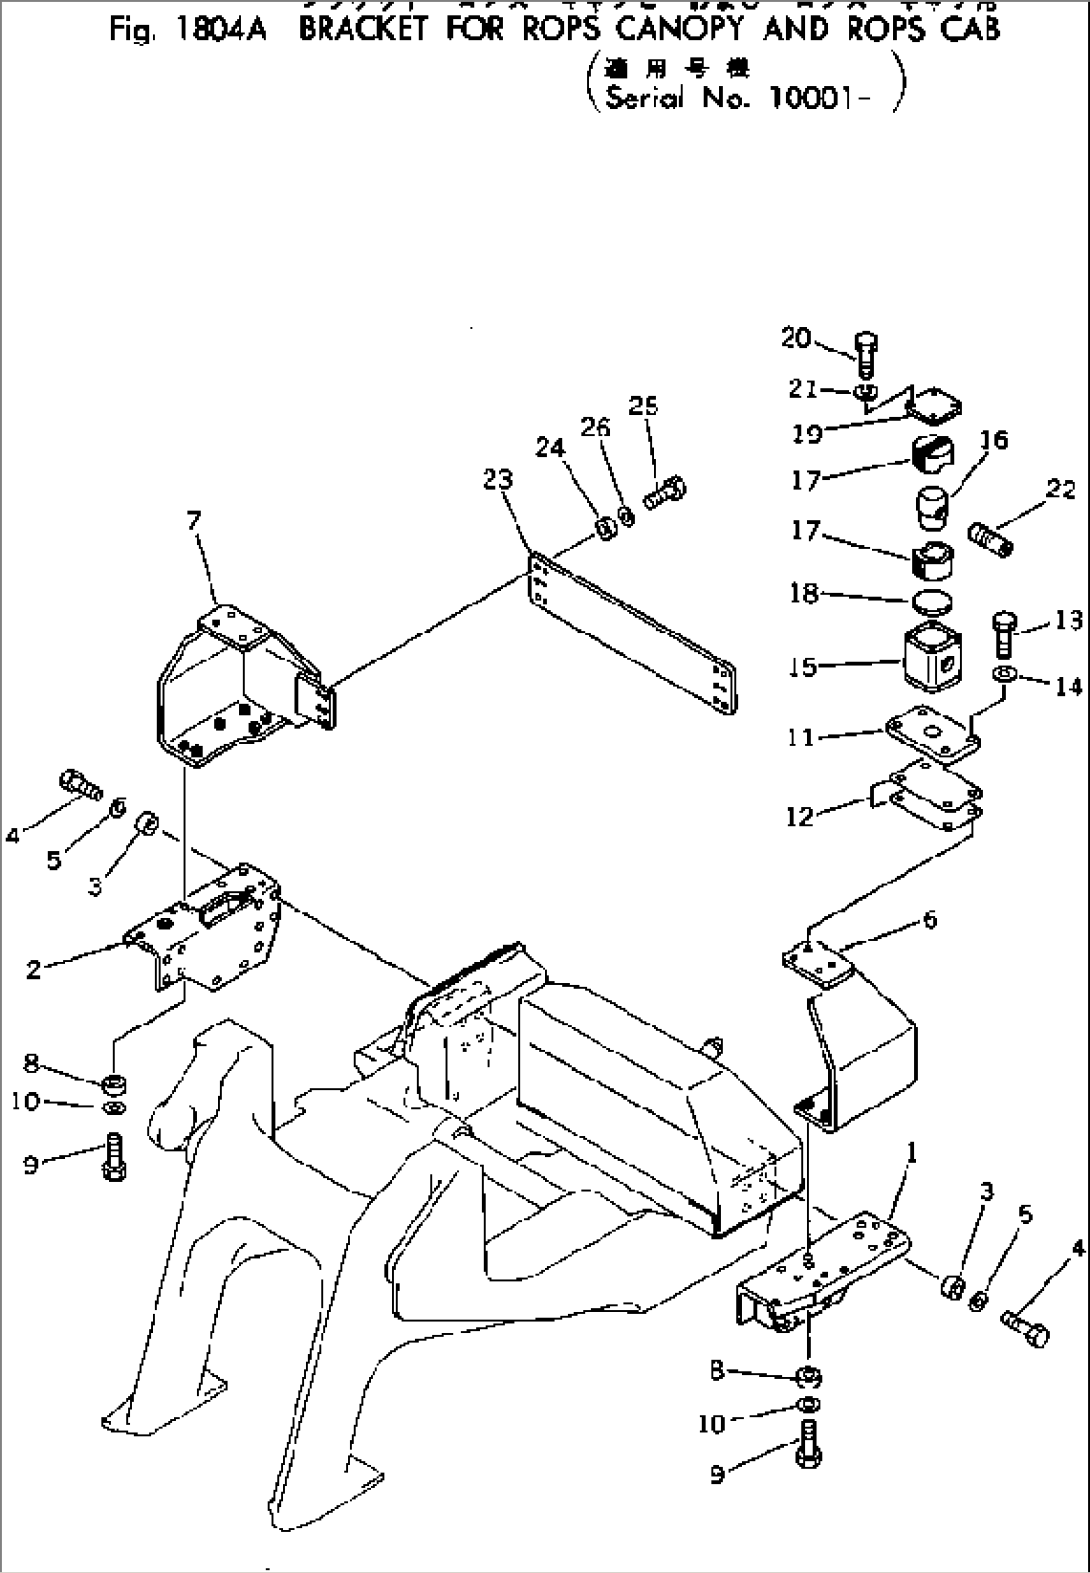 BRACKET FOR ROPS CANOPY AND ROPS CAB(#10001-)